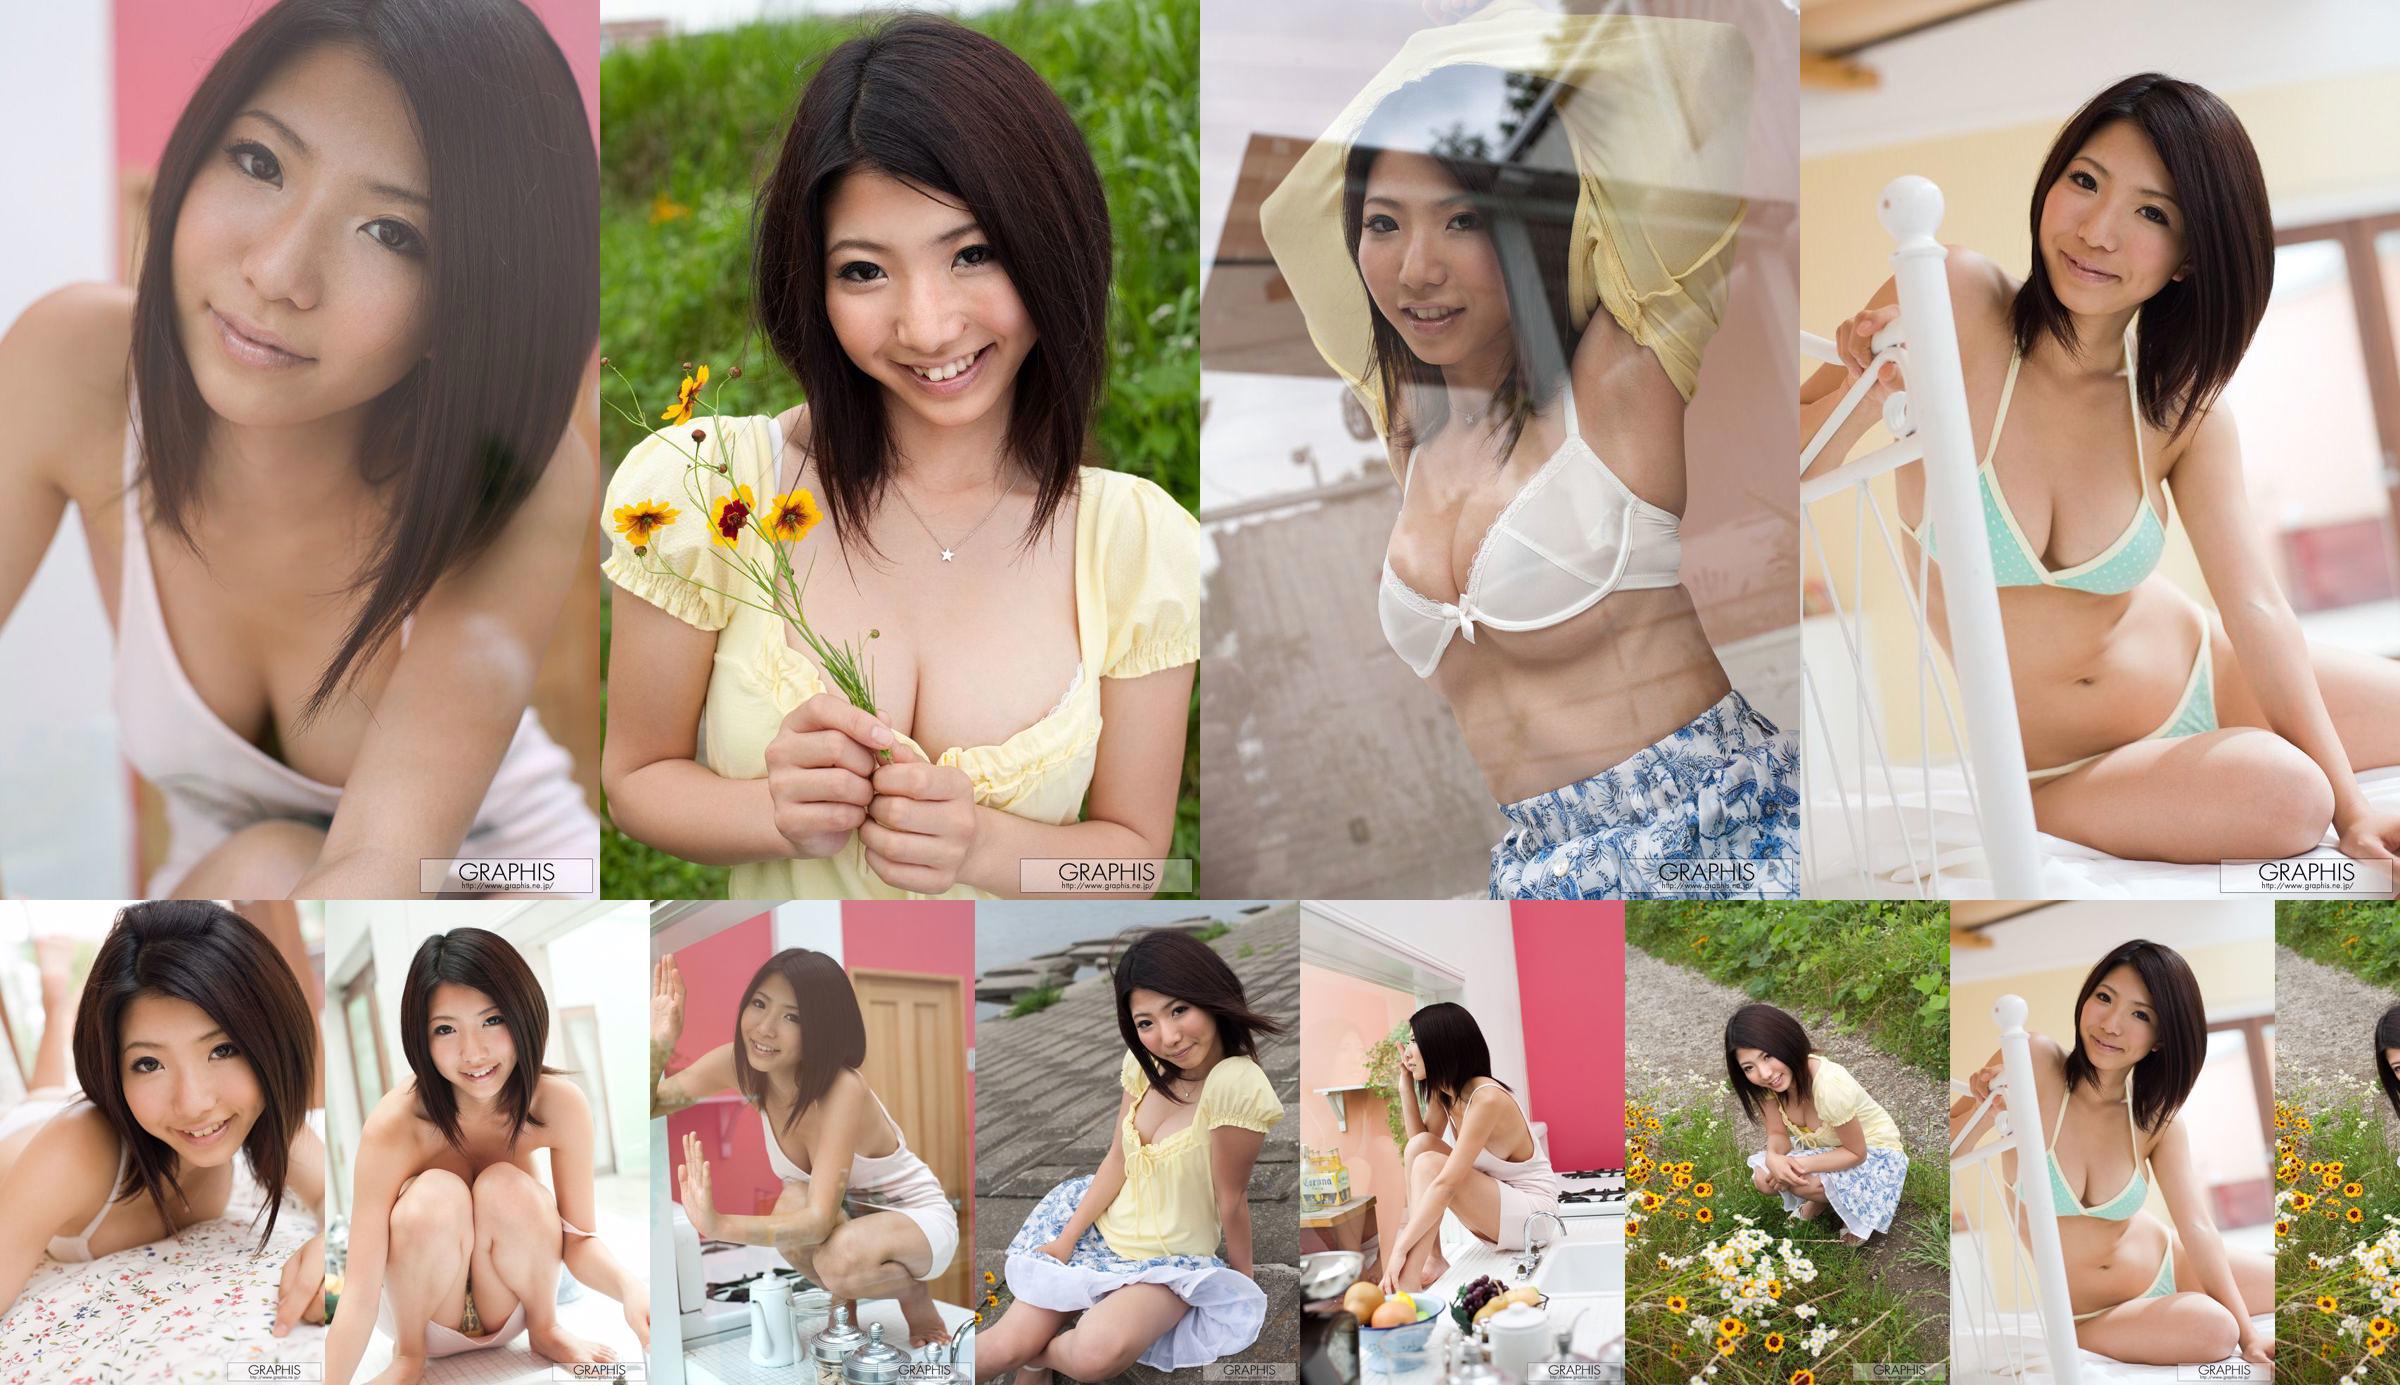 An Ann 《Simple and Innocent》 [Graphis] Gals No.aa3323 Seite 8